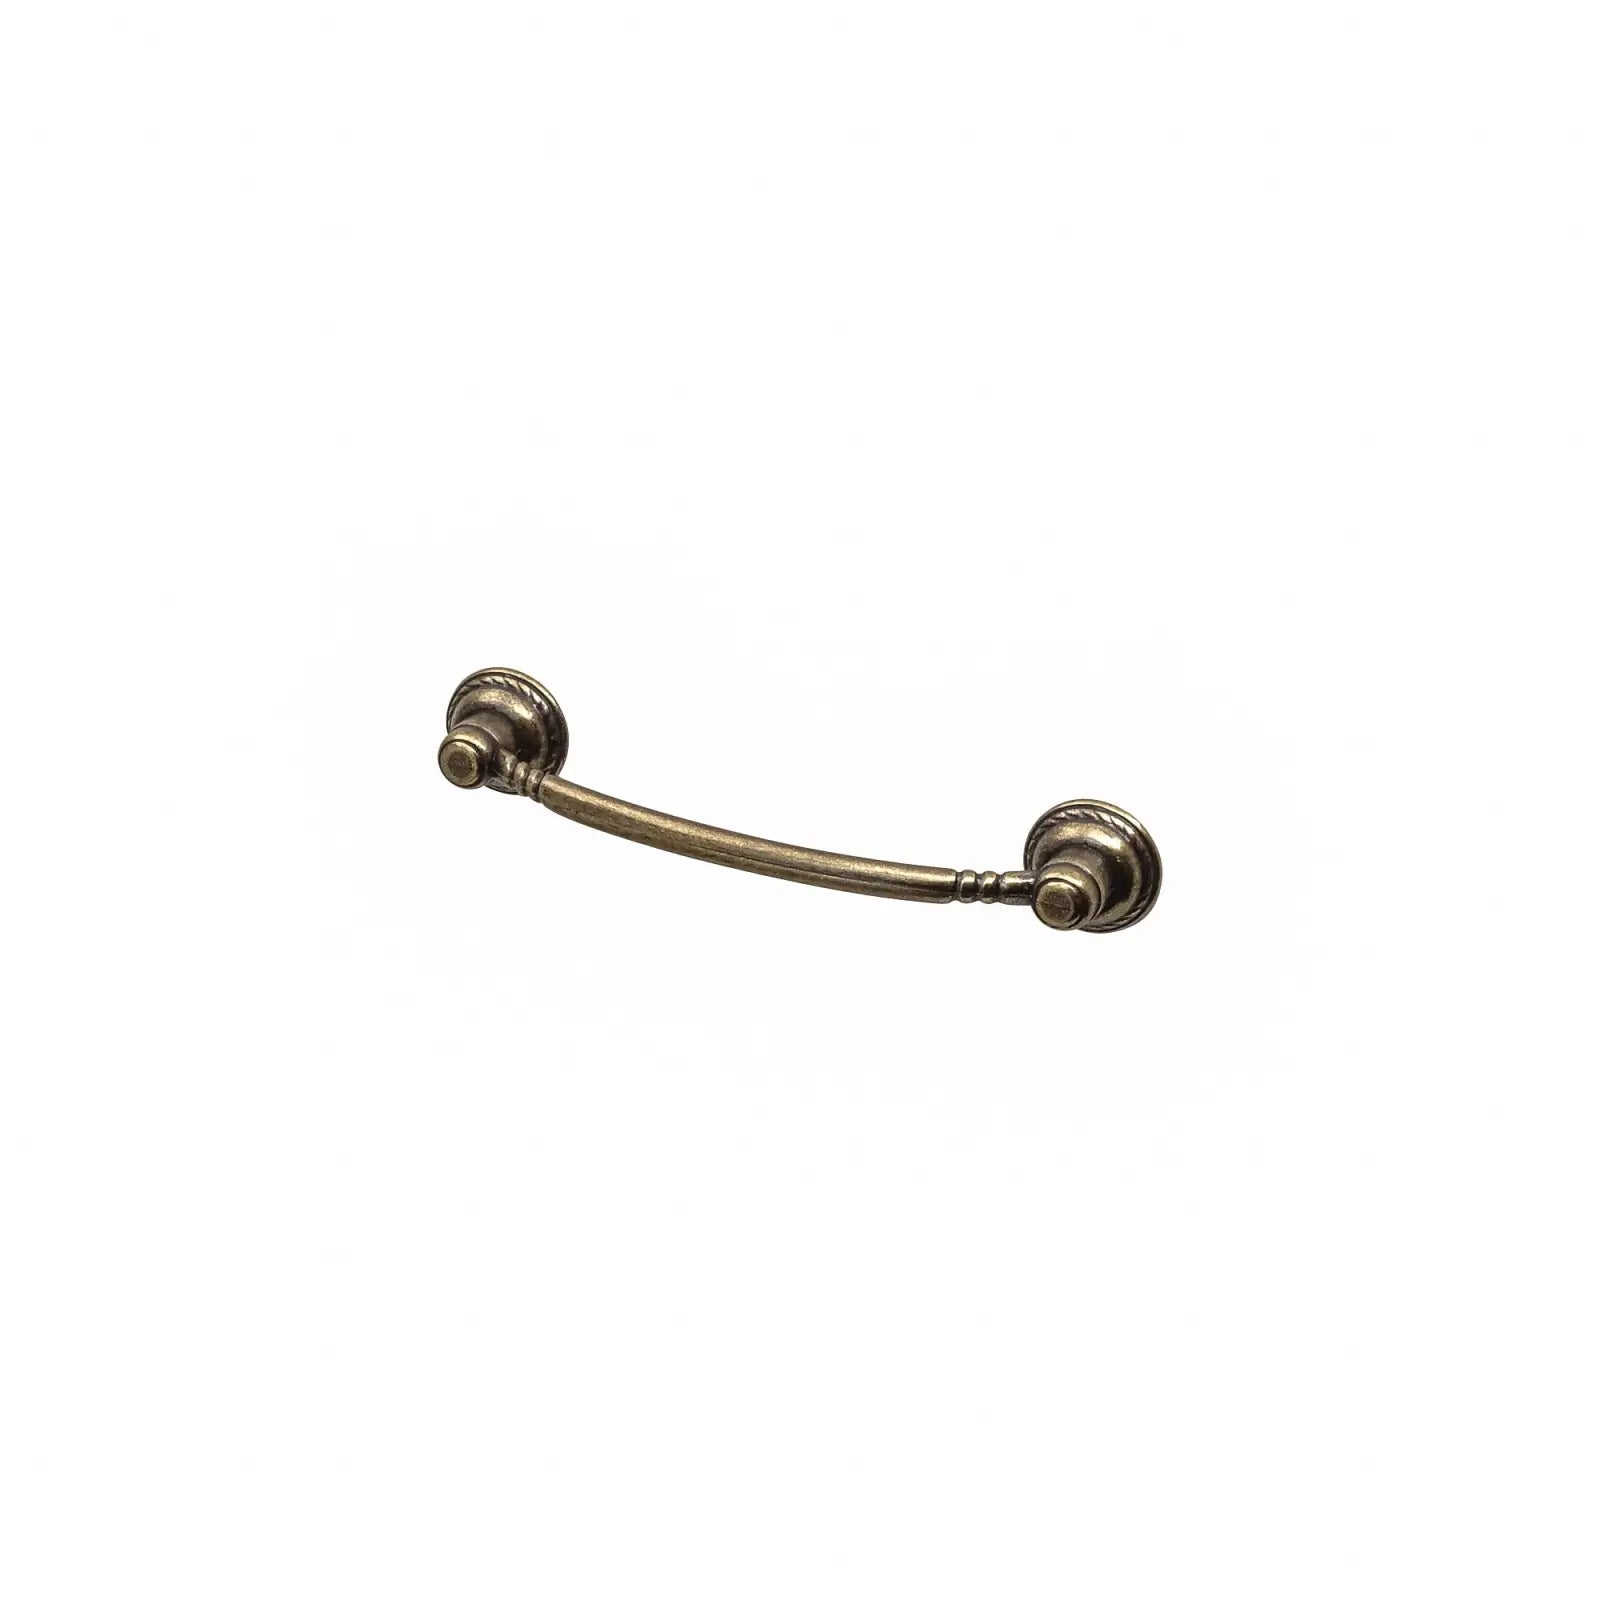 Pipo - Traditional Bow Pull Handle - Antique Brass - Decor And Decor